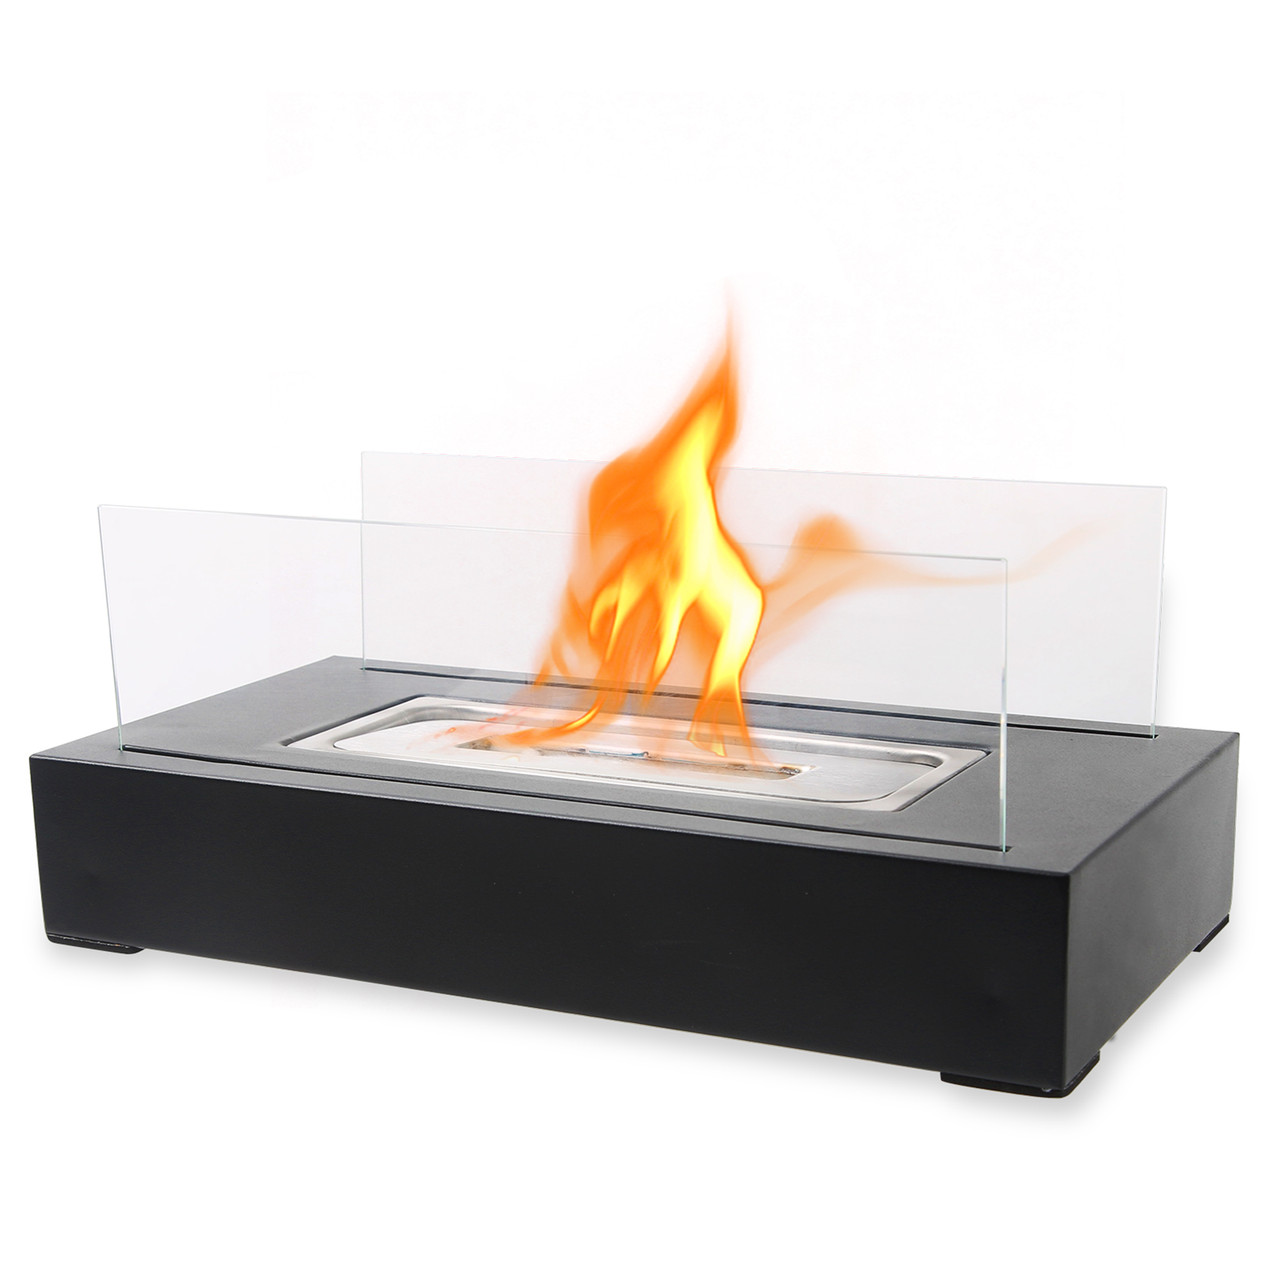 Bio Ethanol Tabletop Fireplace, Rust Resistant Stainless Steel